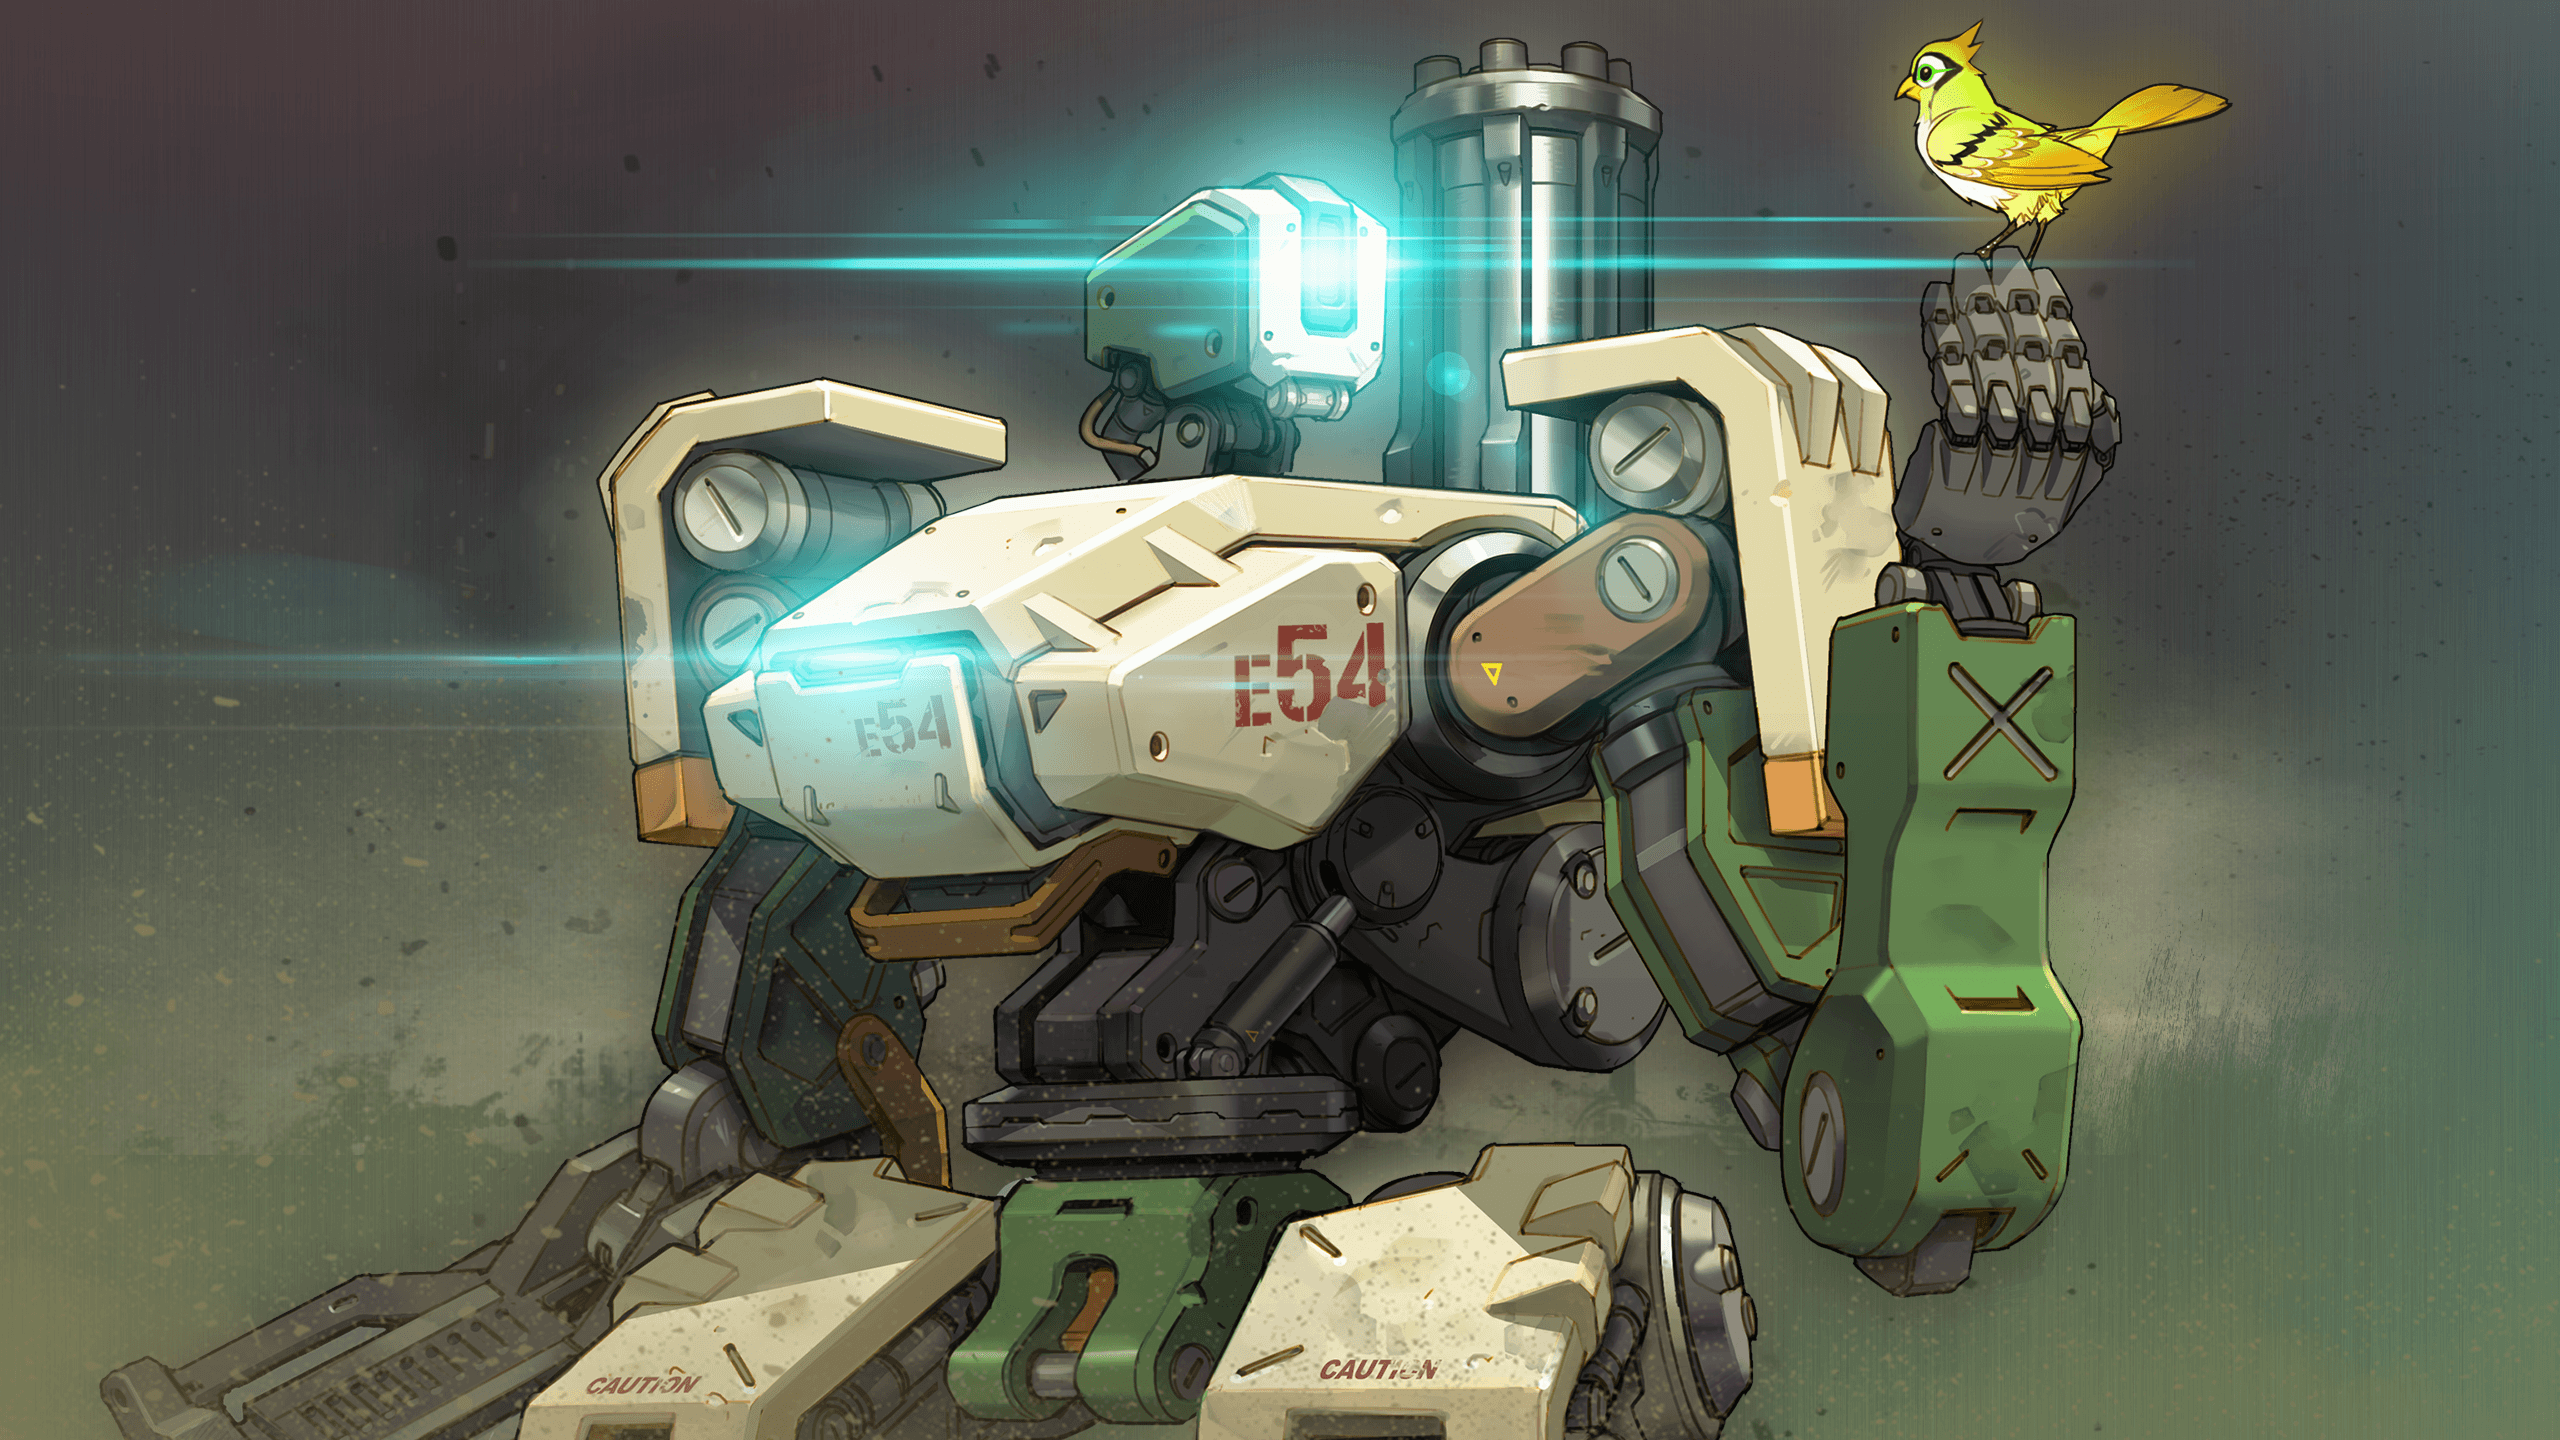 Overwatch Bastion Wallpapers